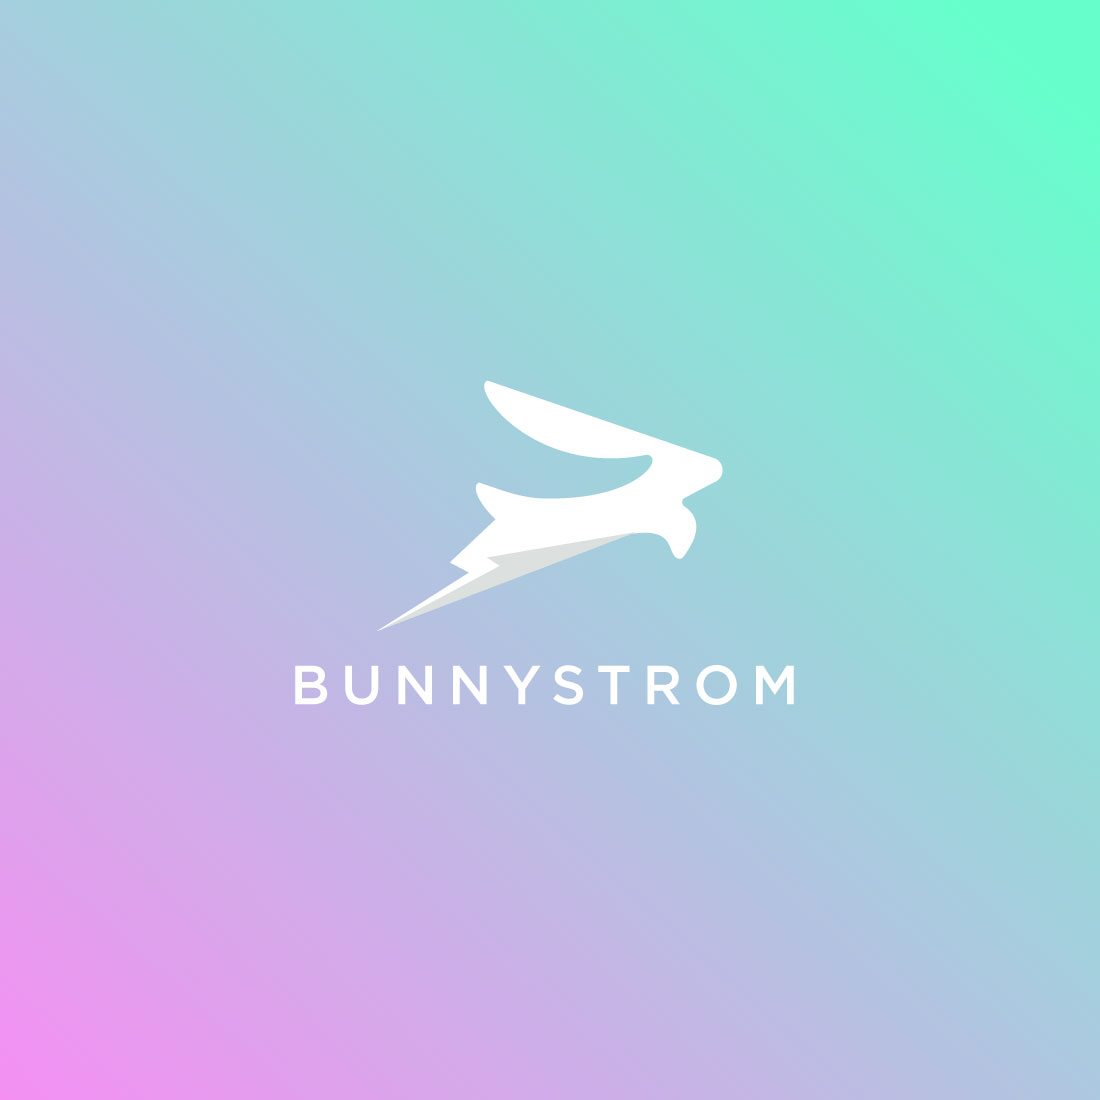 bunnystrom logo typography preview image.